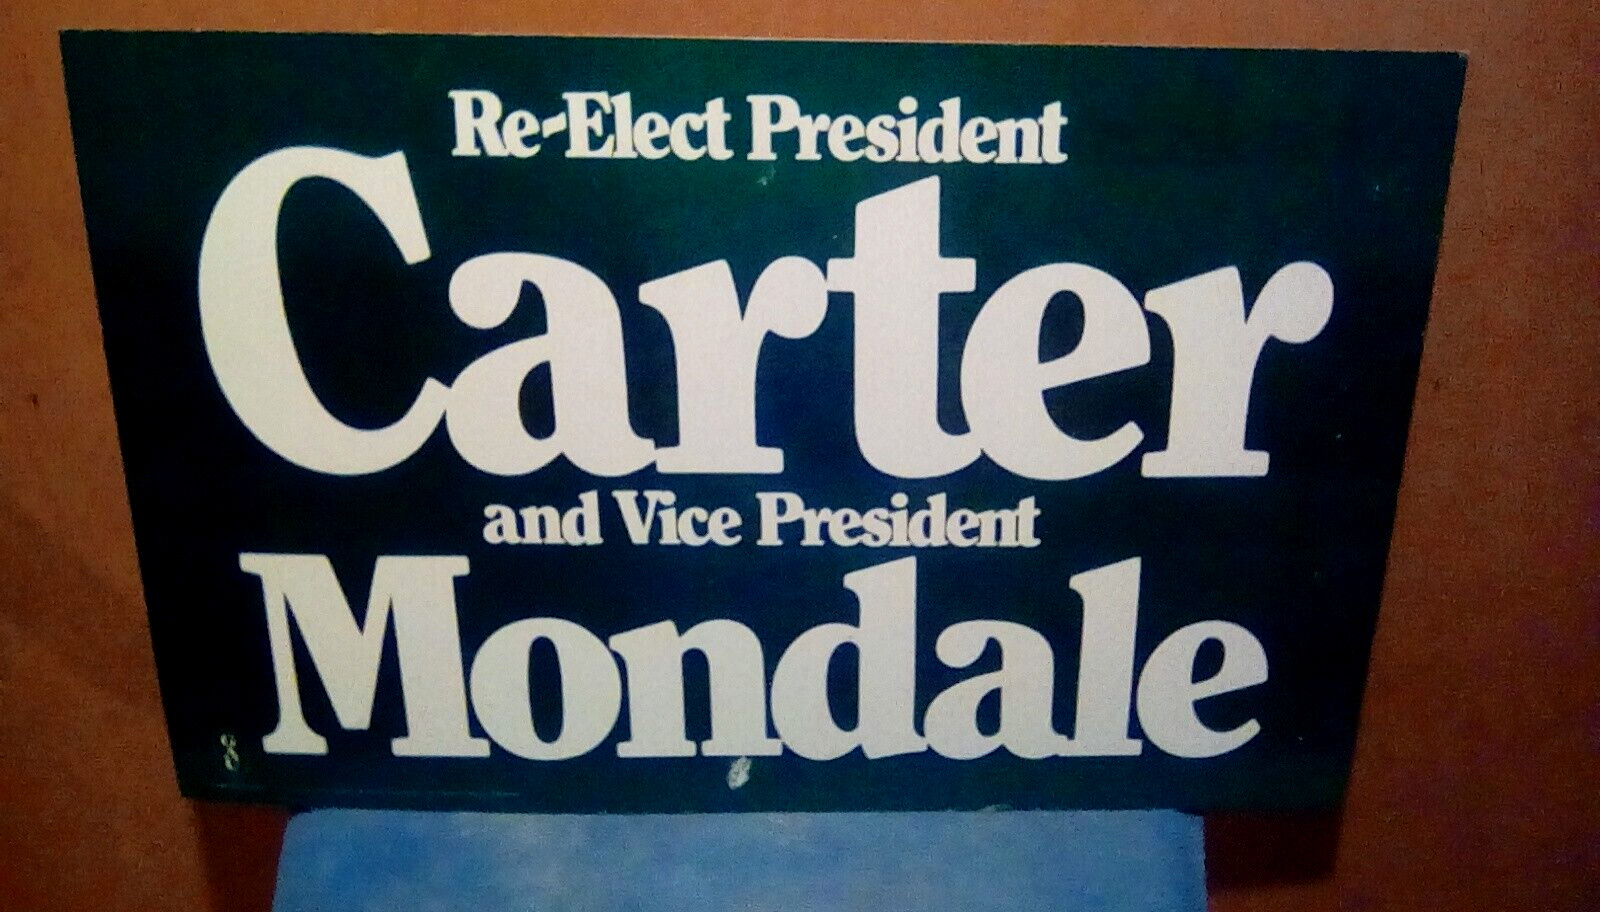 1980 CARTER MONDALE PRESIDENT VICE PRESIDENT RE-ELECTION CAMPAIGN POSTER - RARE